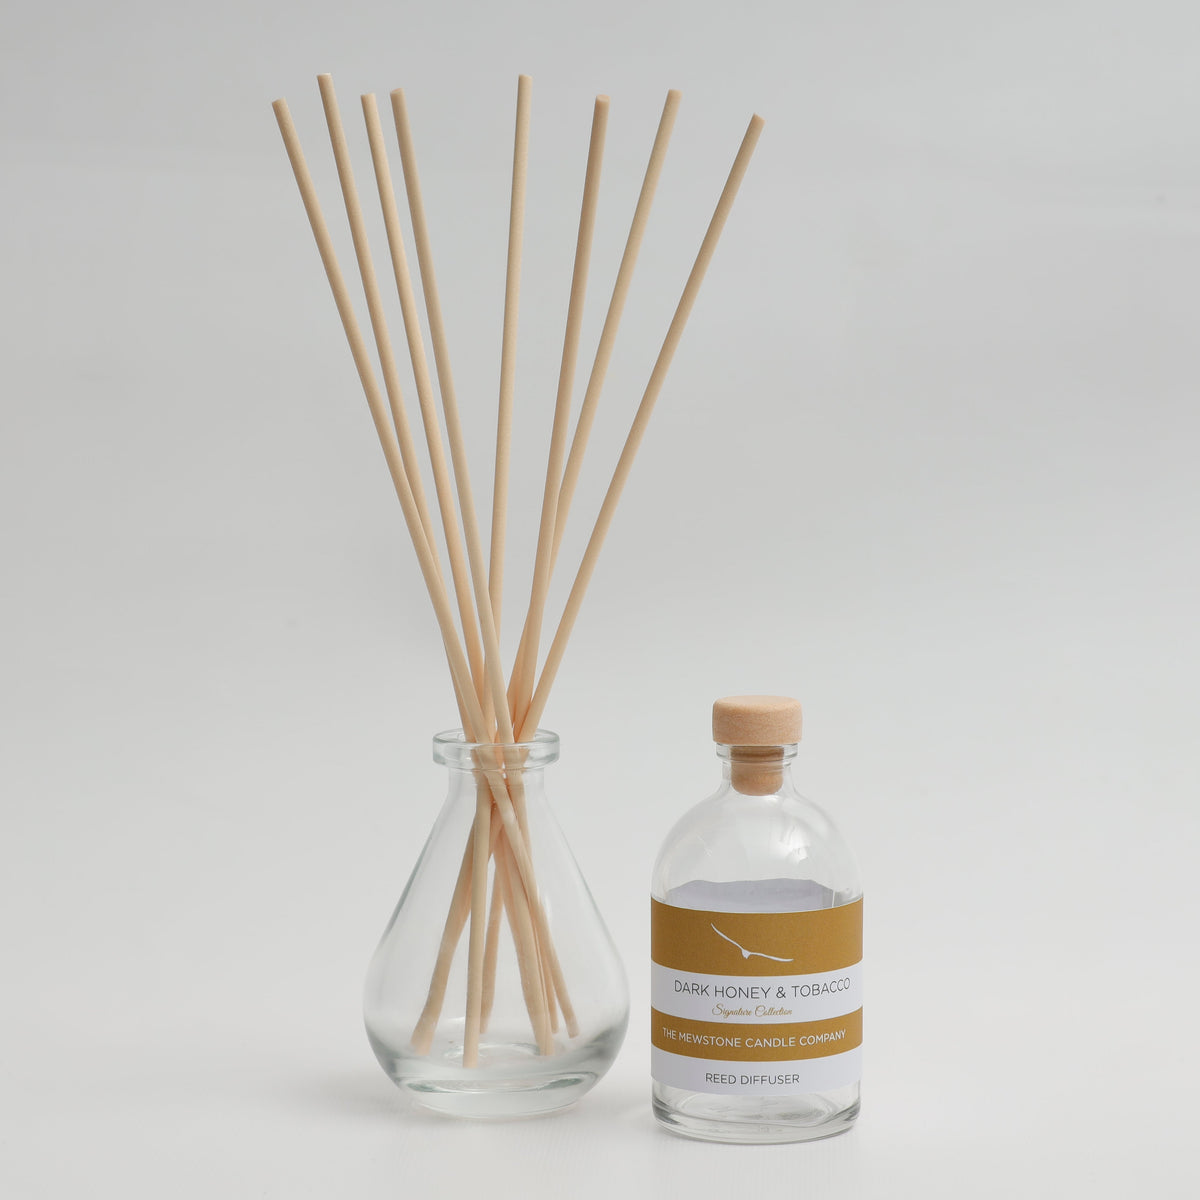 Dark Honey & Tobacco Reed Diffuser - The Mewstone Candle Co